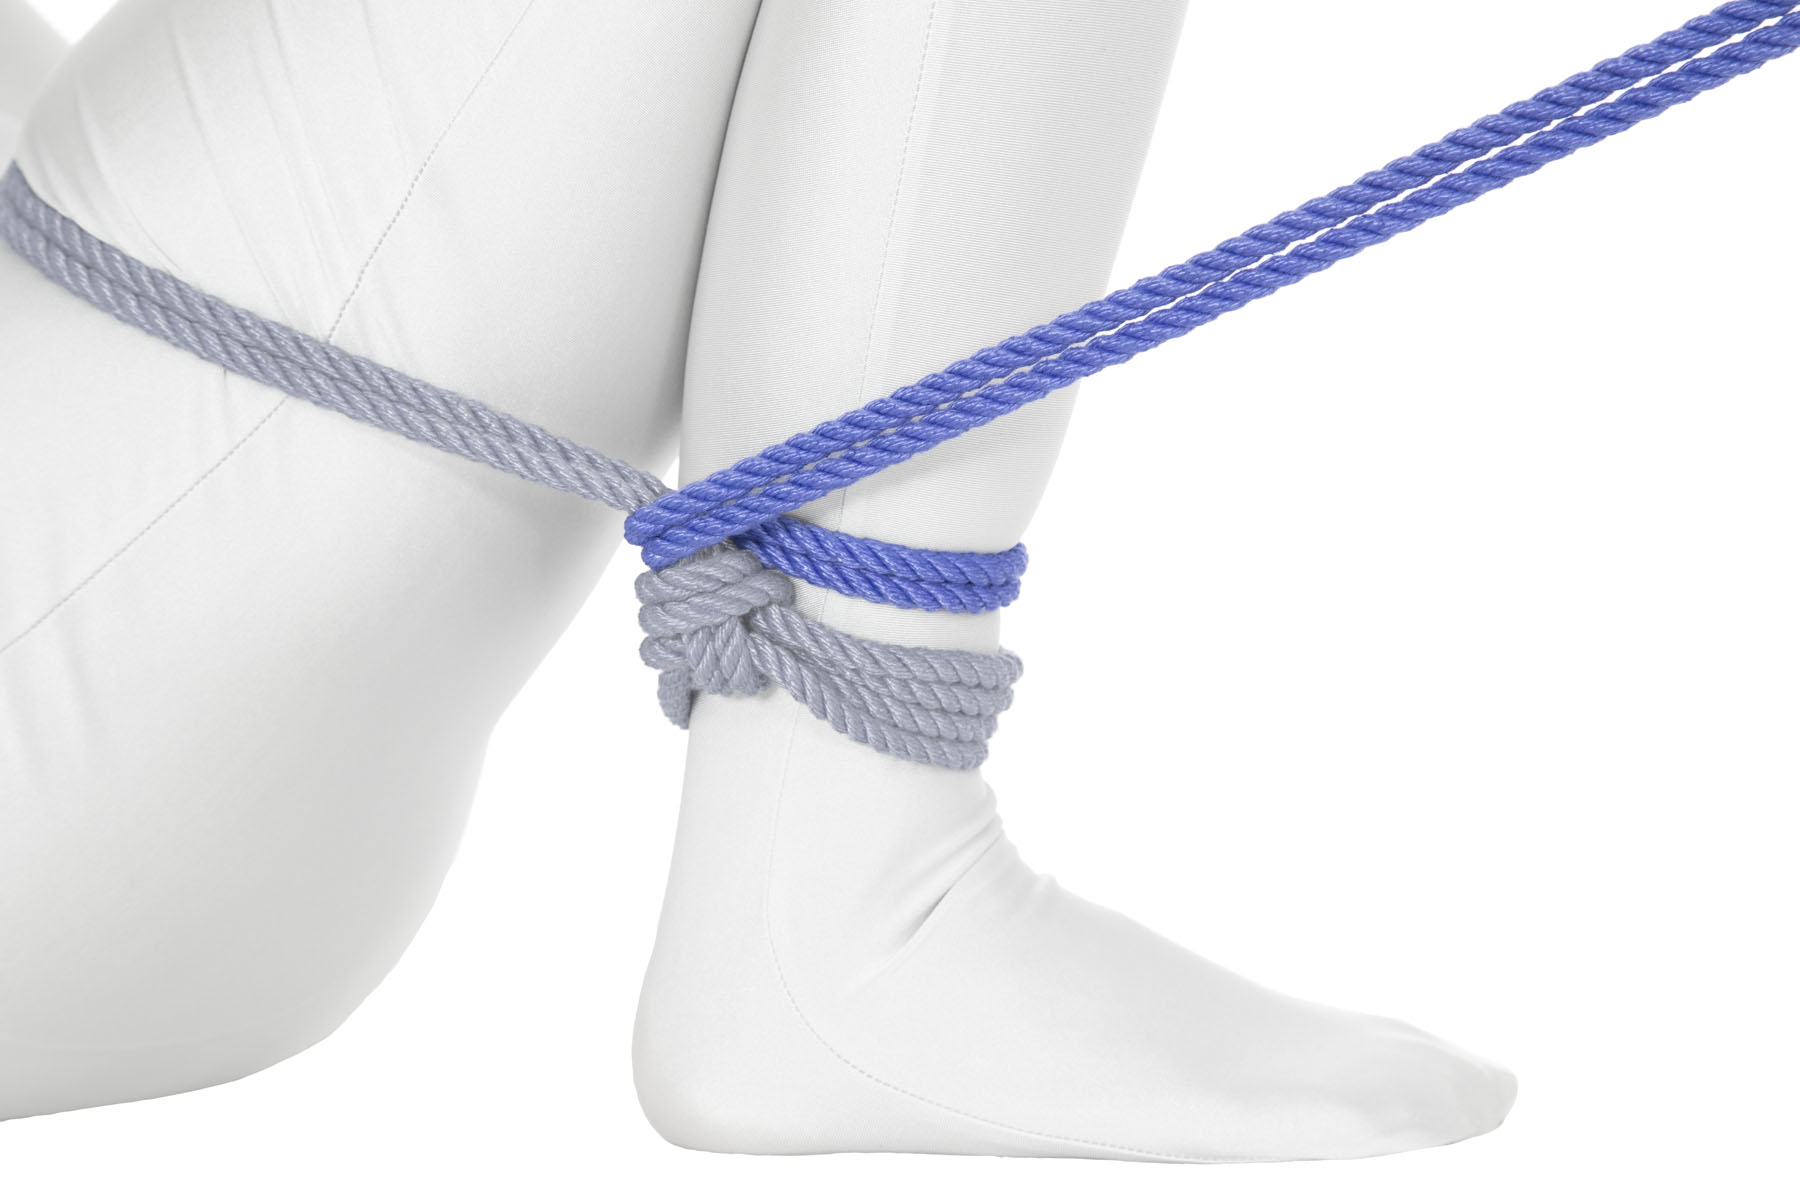 The rope crosses under itself just above the single column tie and makes a reverse tension, pulling back toward the toes.